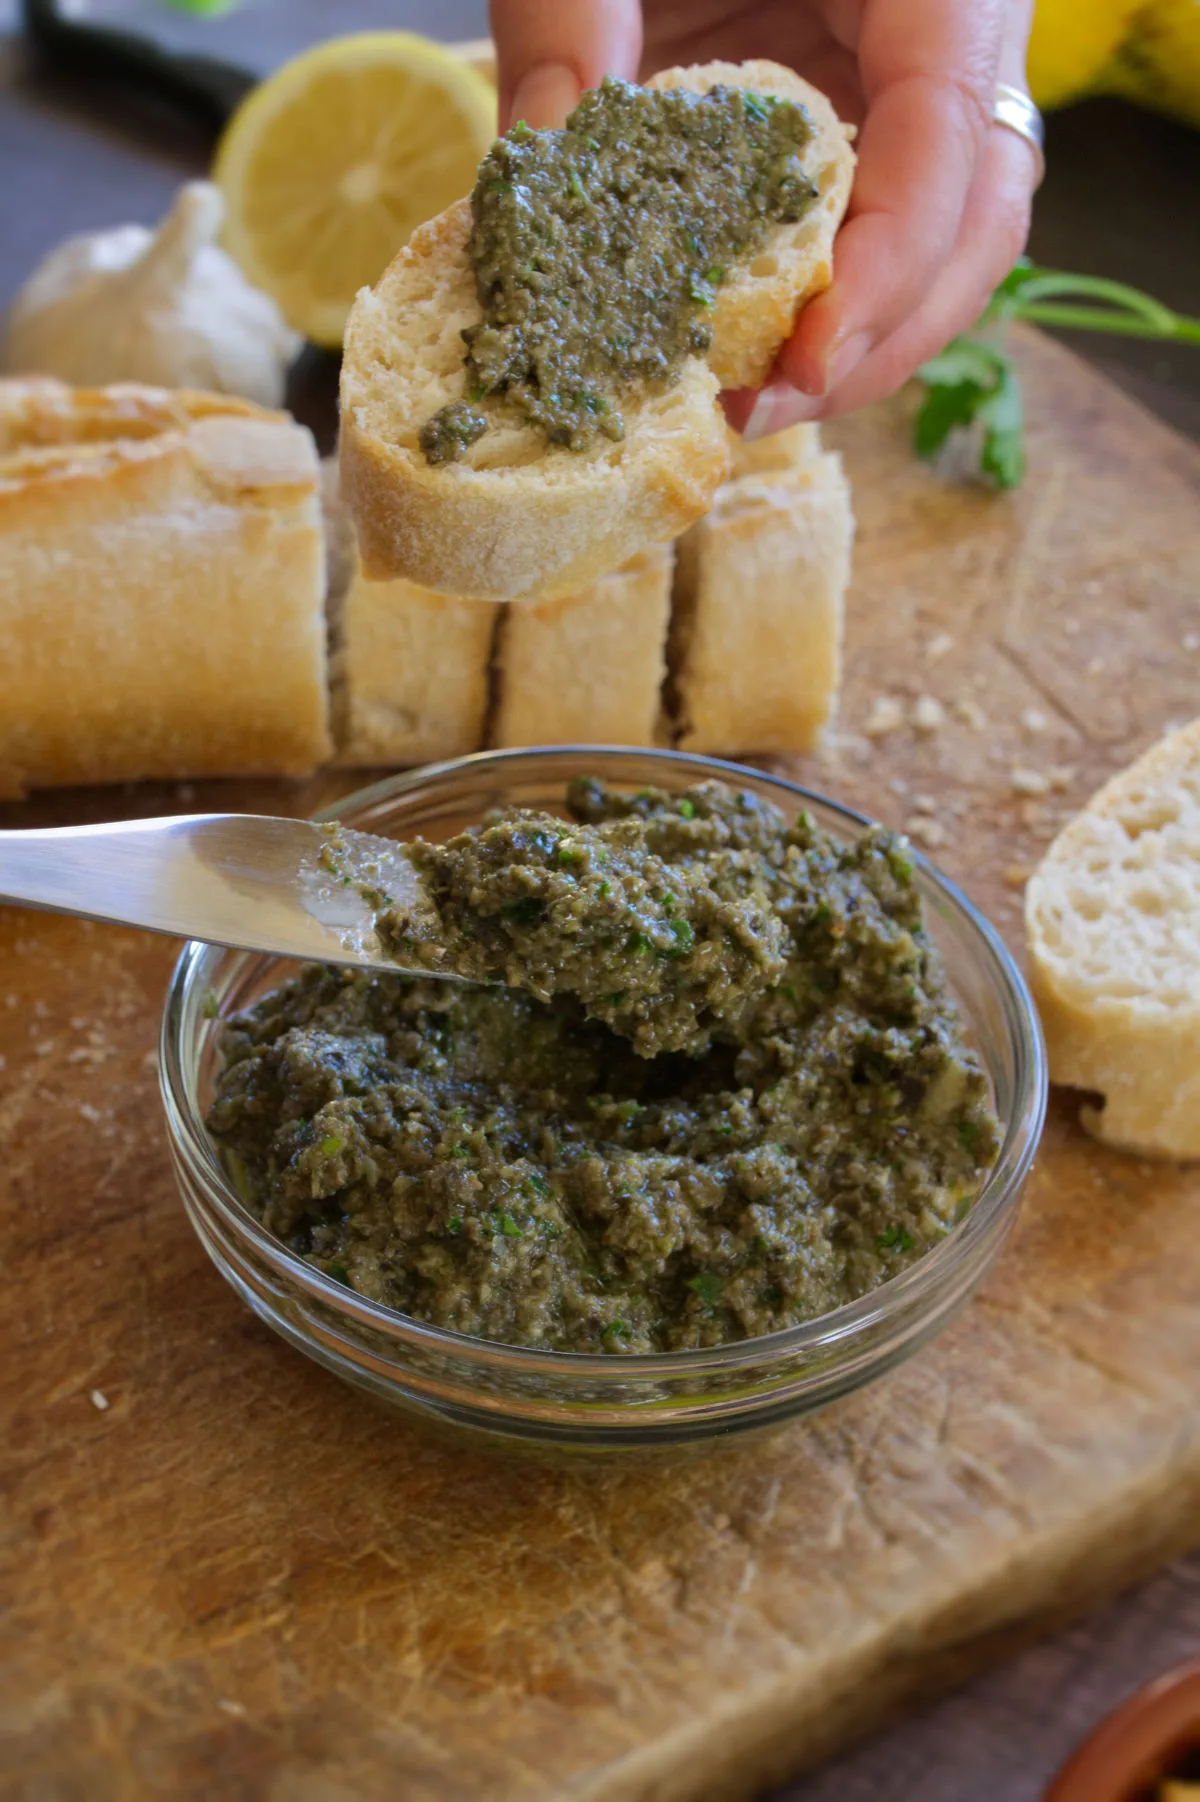 Some olive tapenade is served onto a slice of bread.